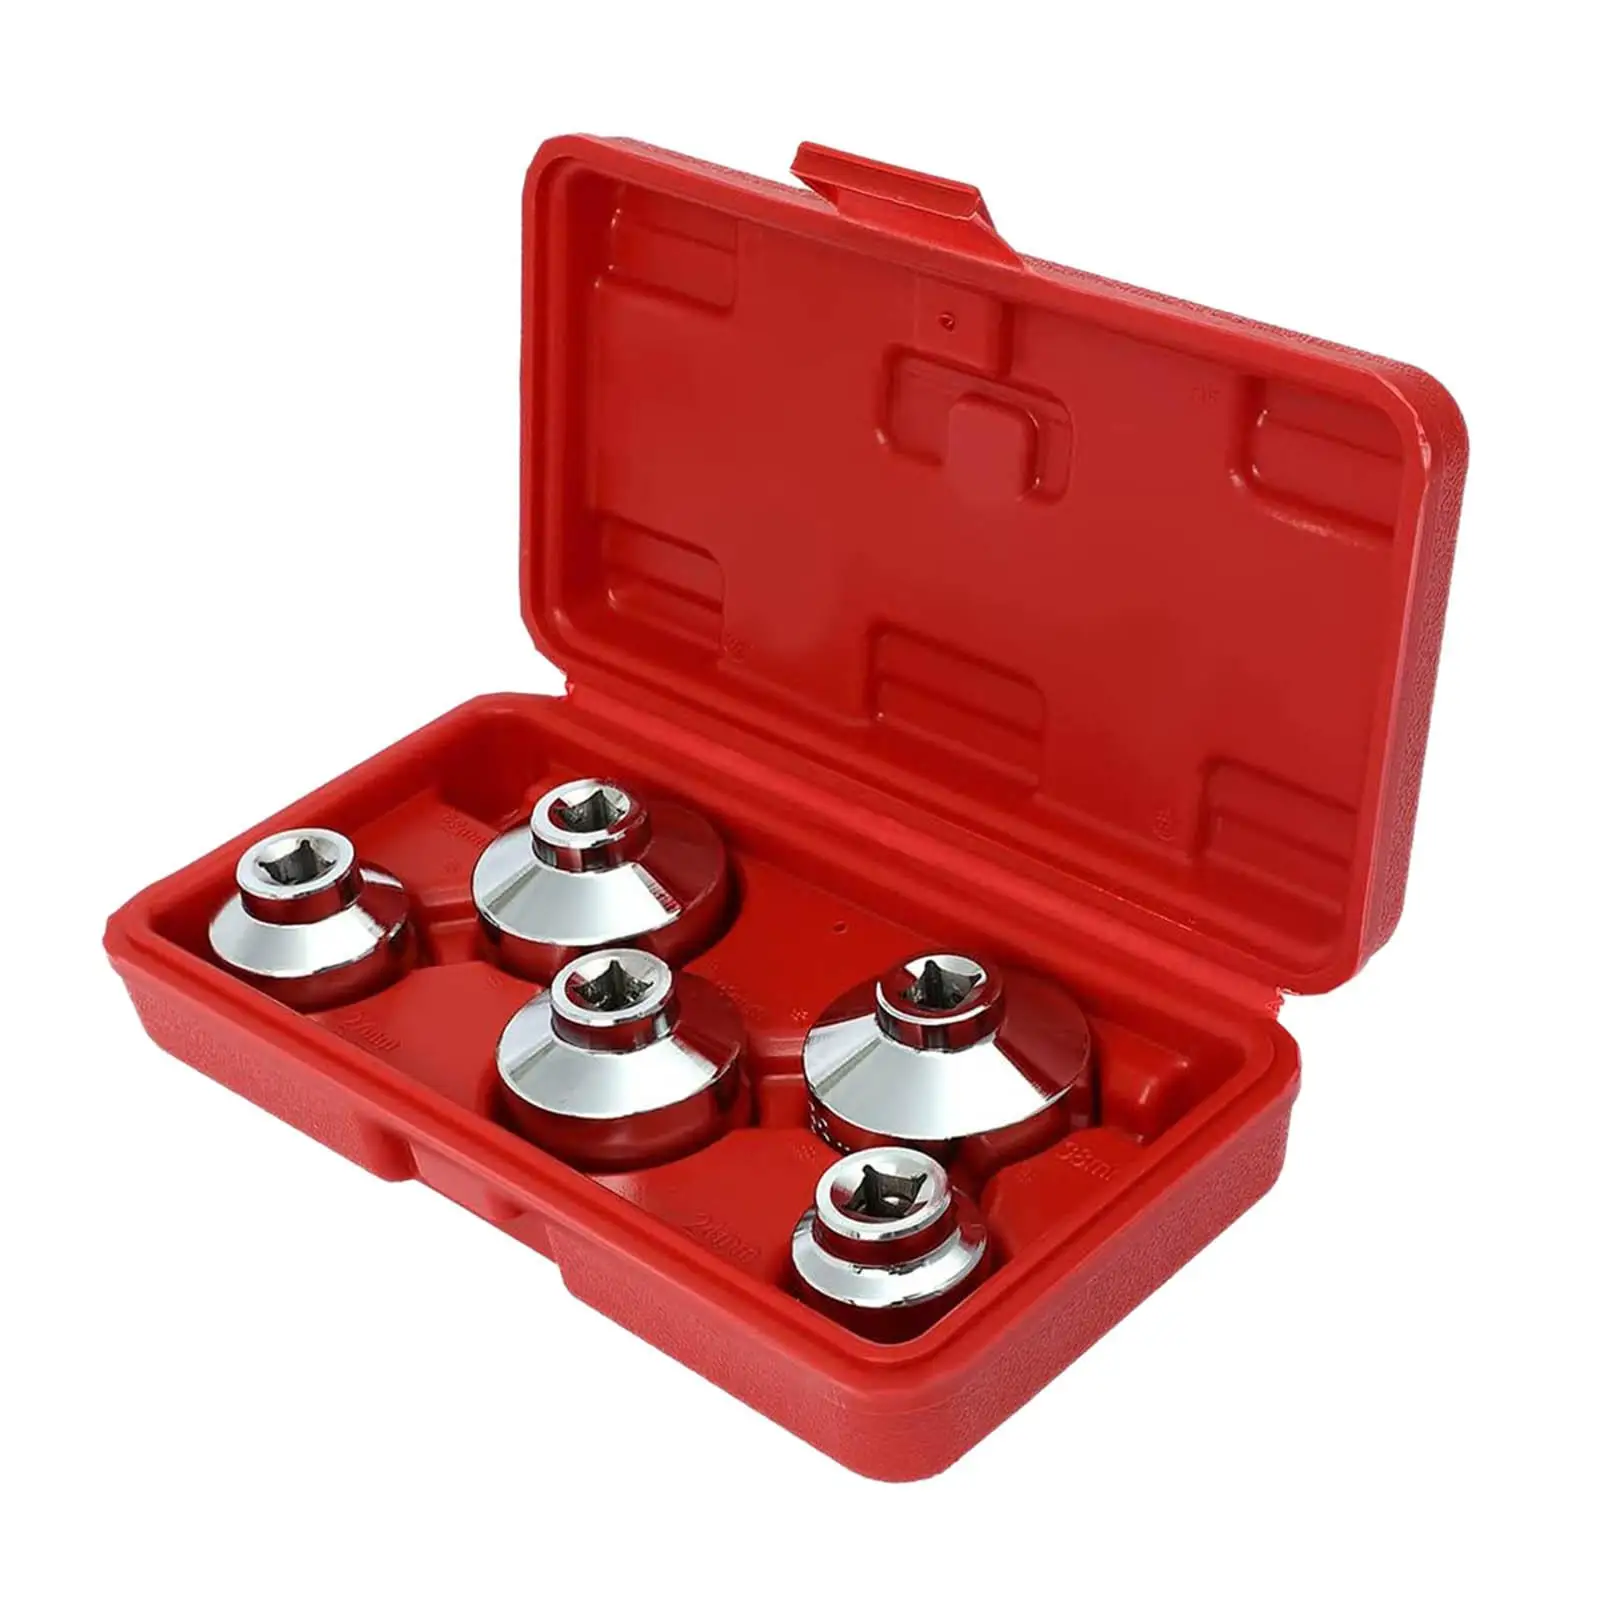 5 Pieces Universal Oil Filter Caps Wrench Socket Set with A Storage Case Drive Cup Type Removal Tool for Hyundai for Kia for GM